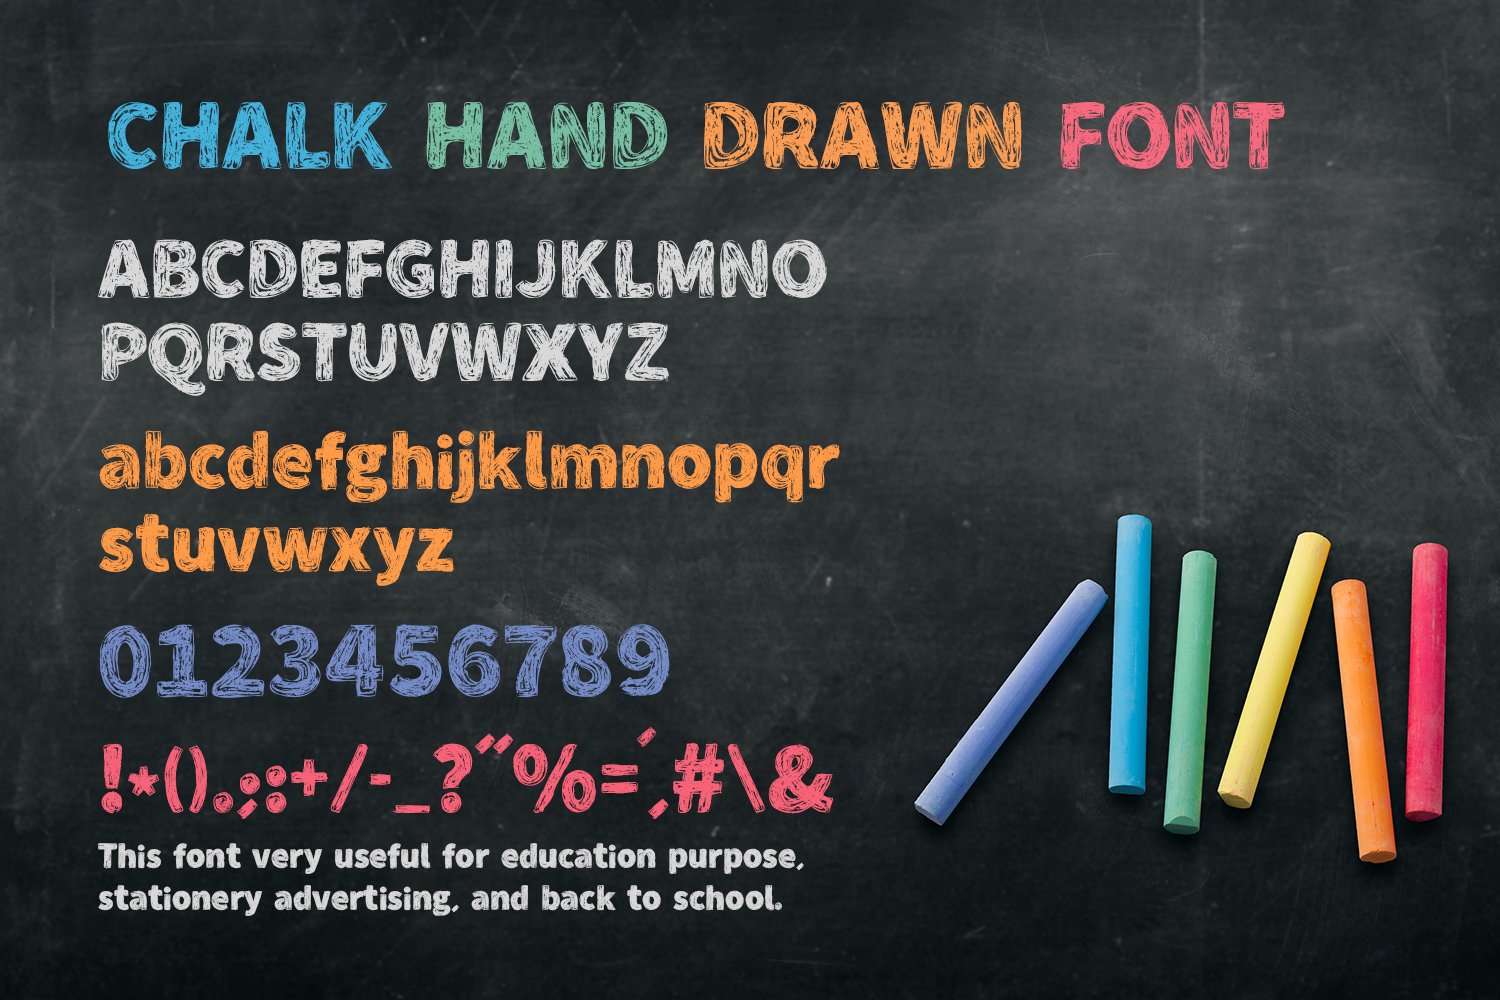 Chalk Hand Drawn Font cover image.